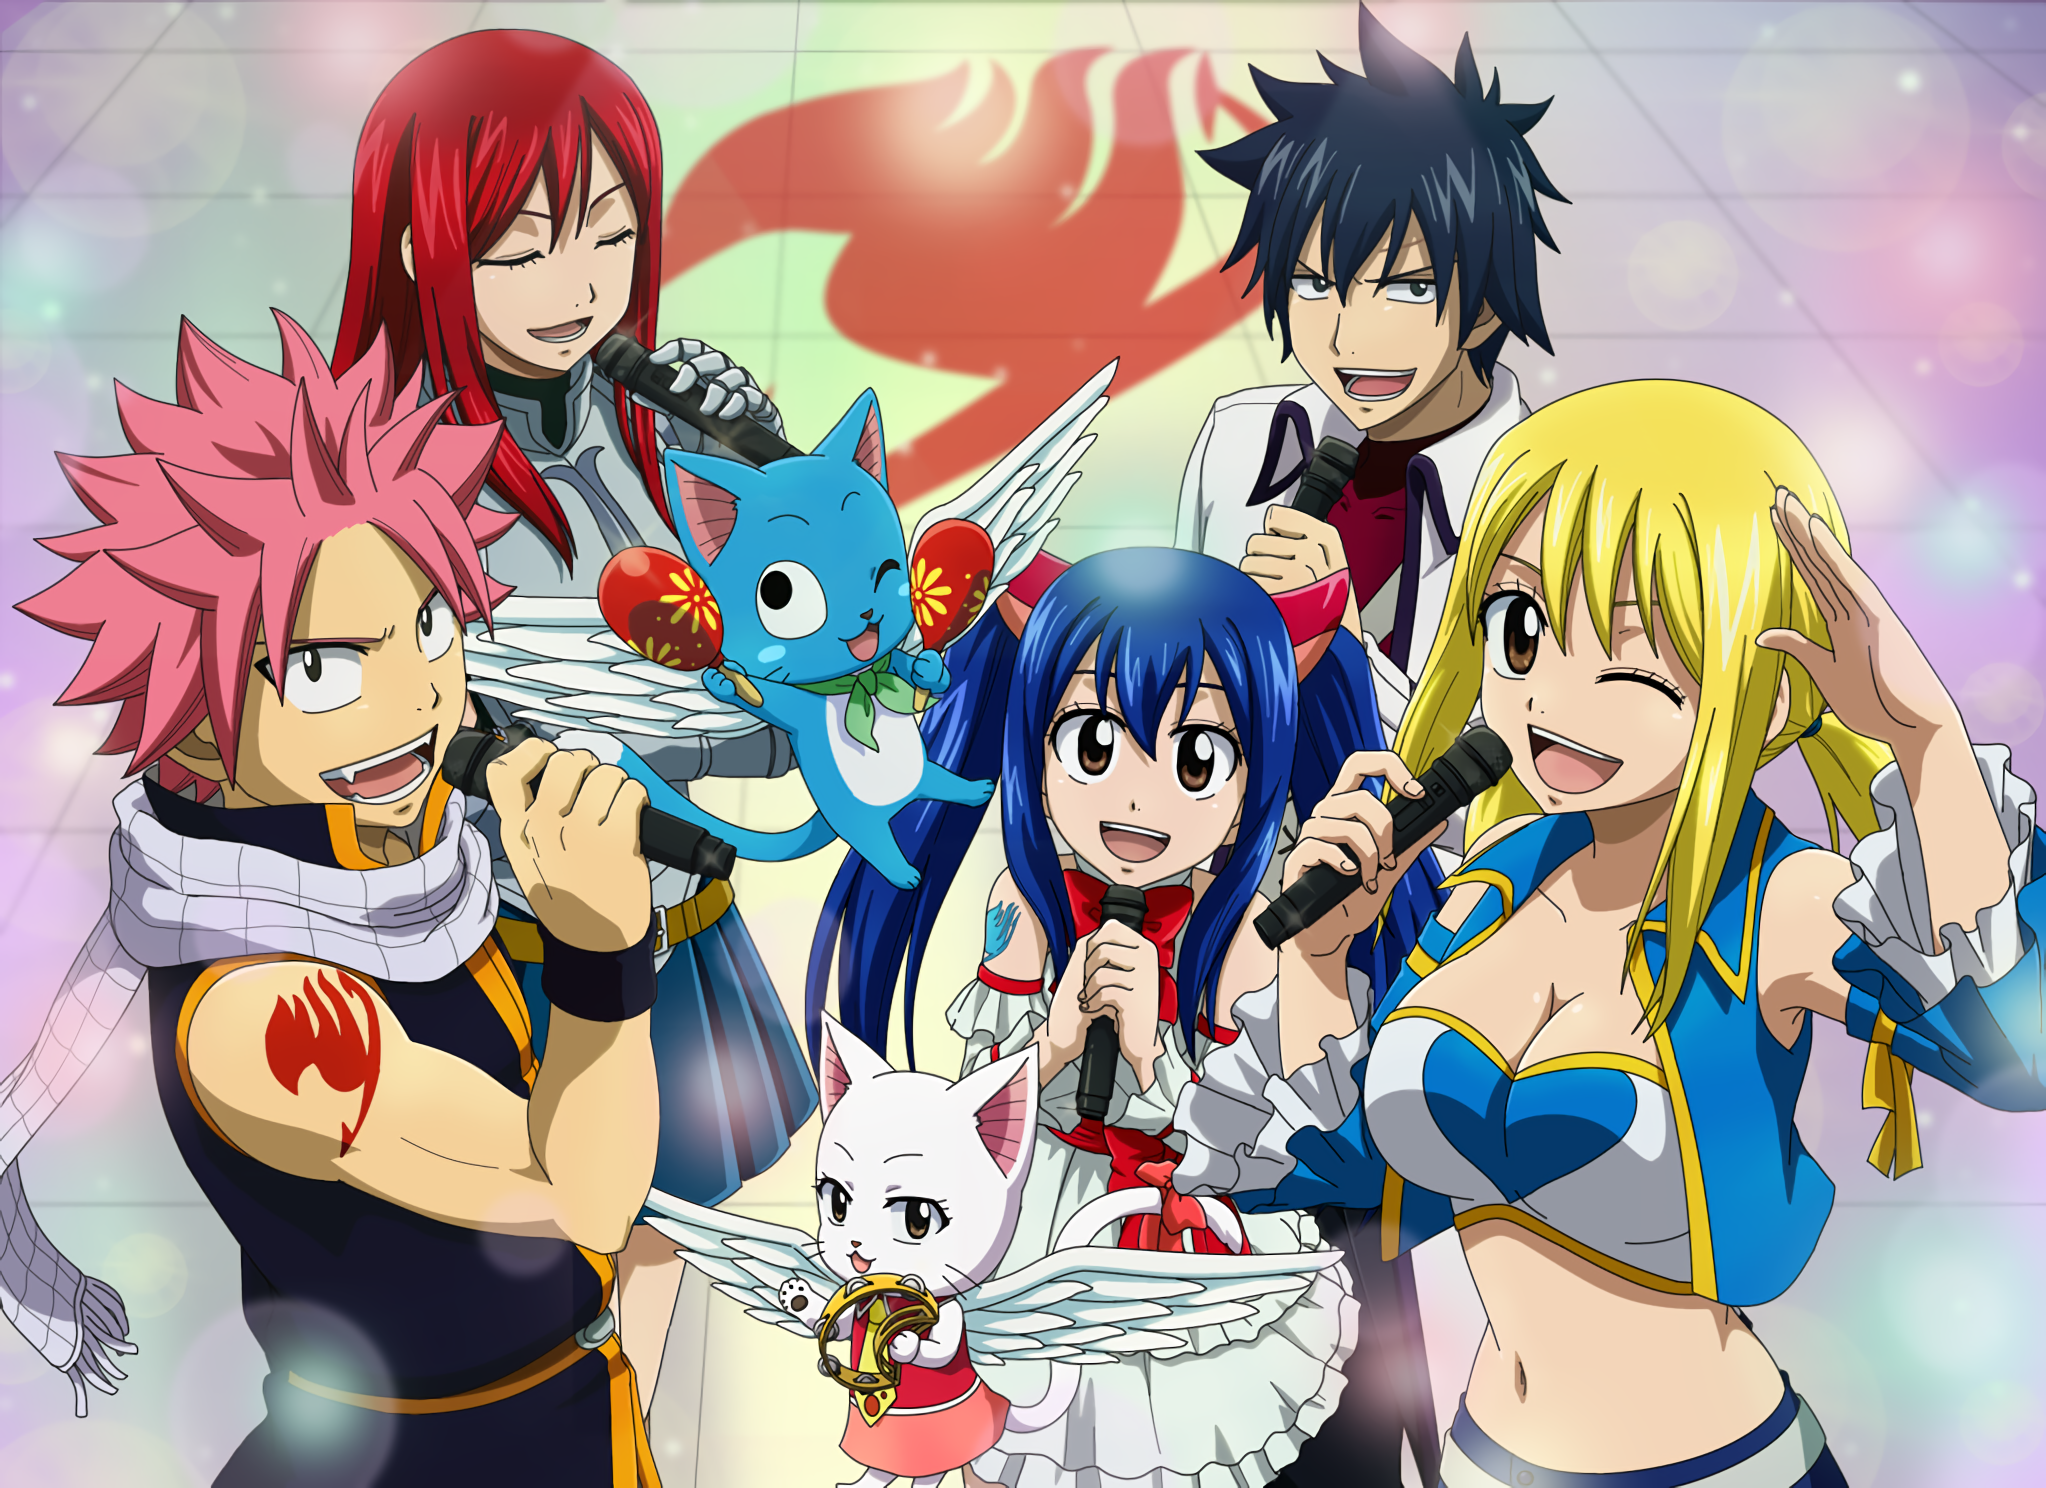 Charles Fairy Tail Erza Scarlet Gray Fullbuster Happy Fairy Tail Lucy Heartfilia Natsu Dragneel Wend 2046x1488